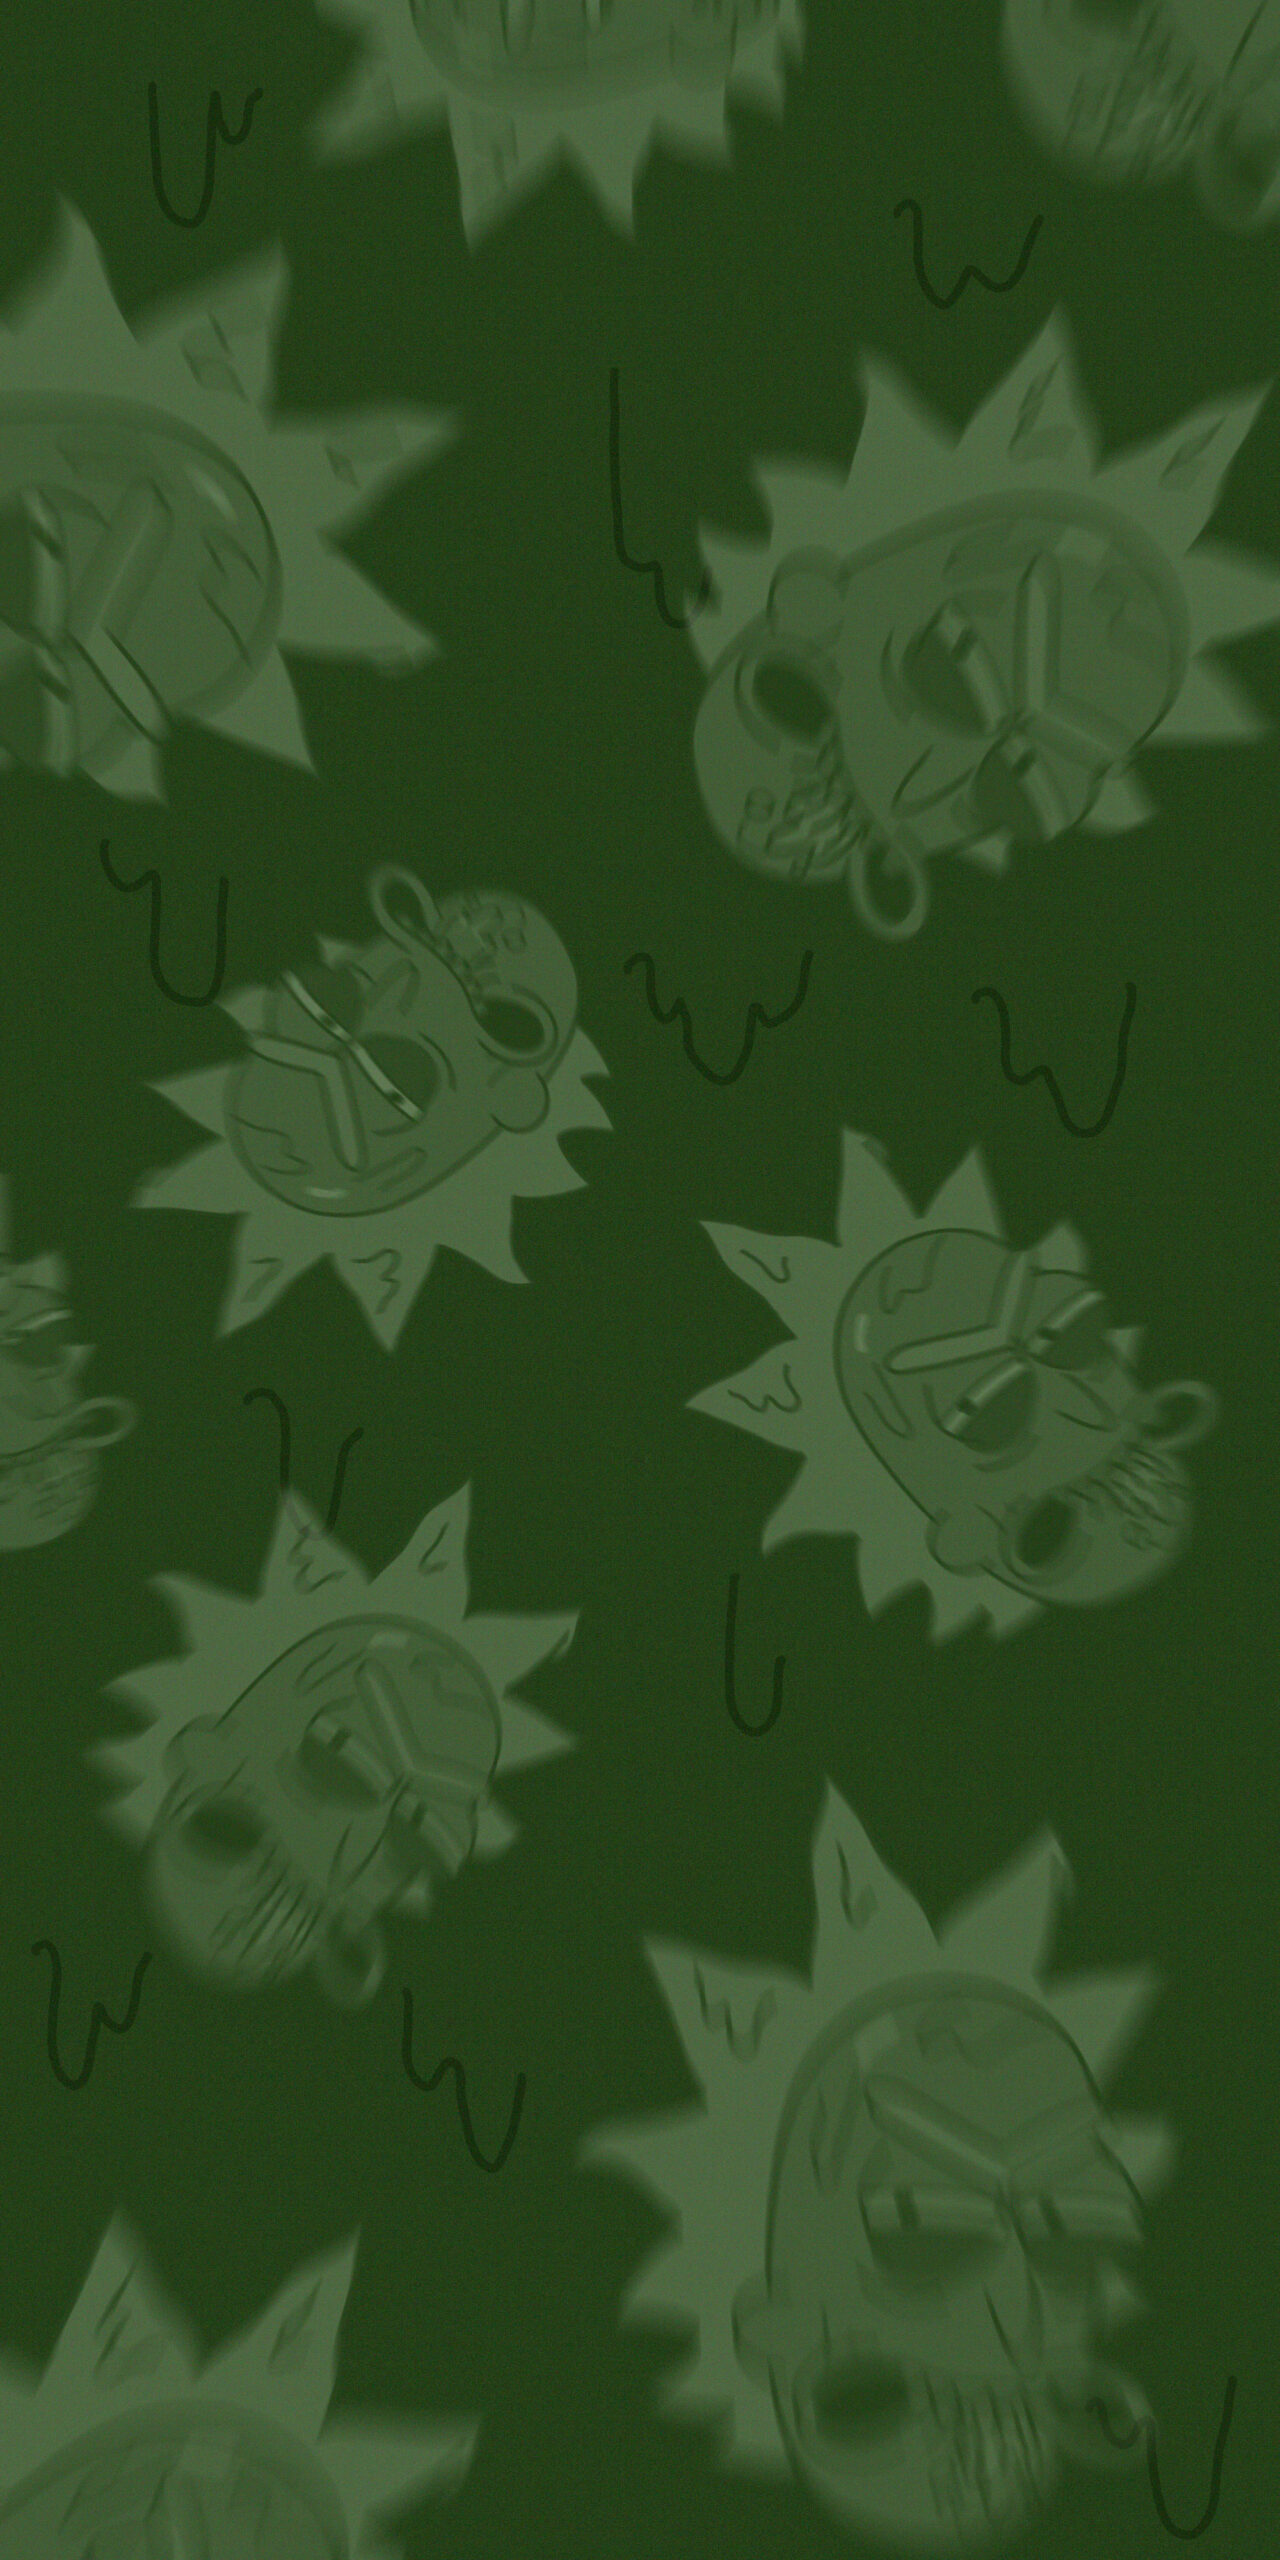 rick and morty toxic rick green background